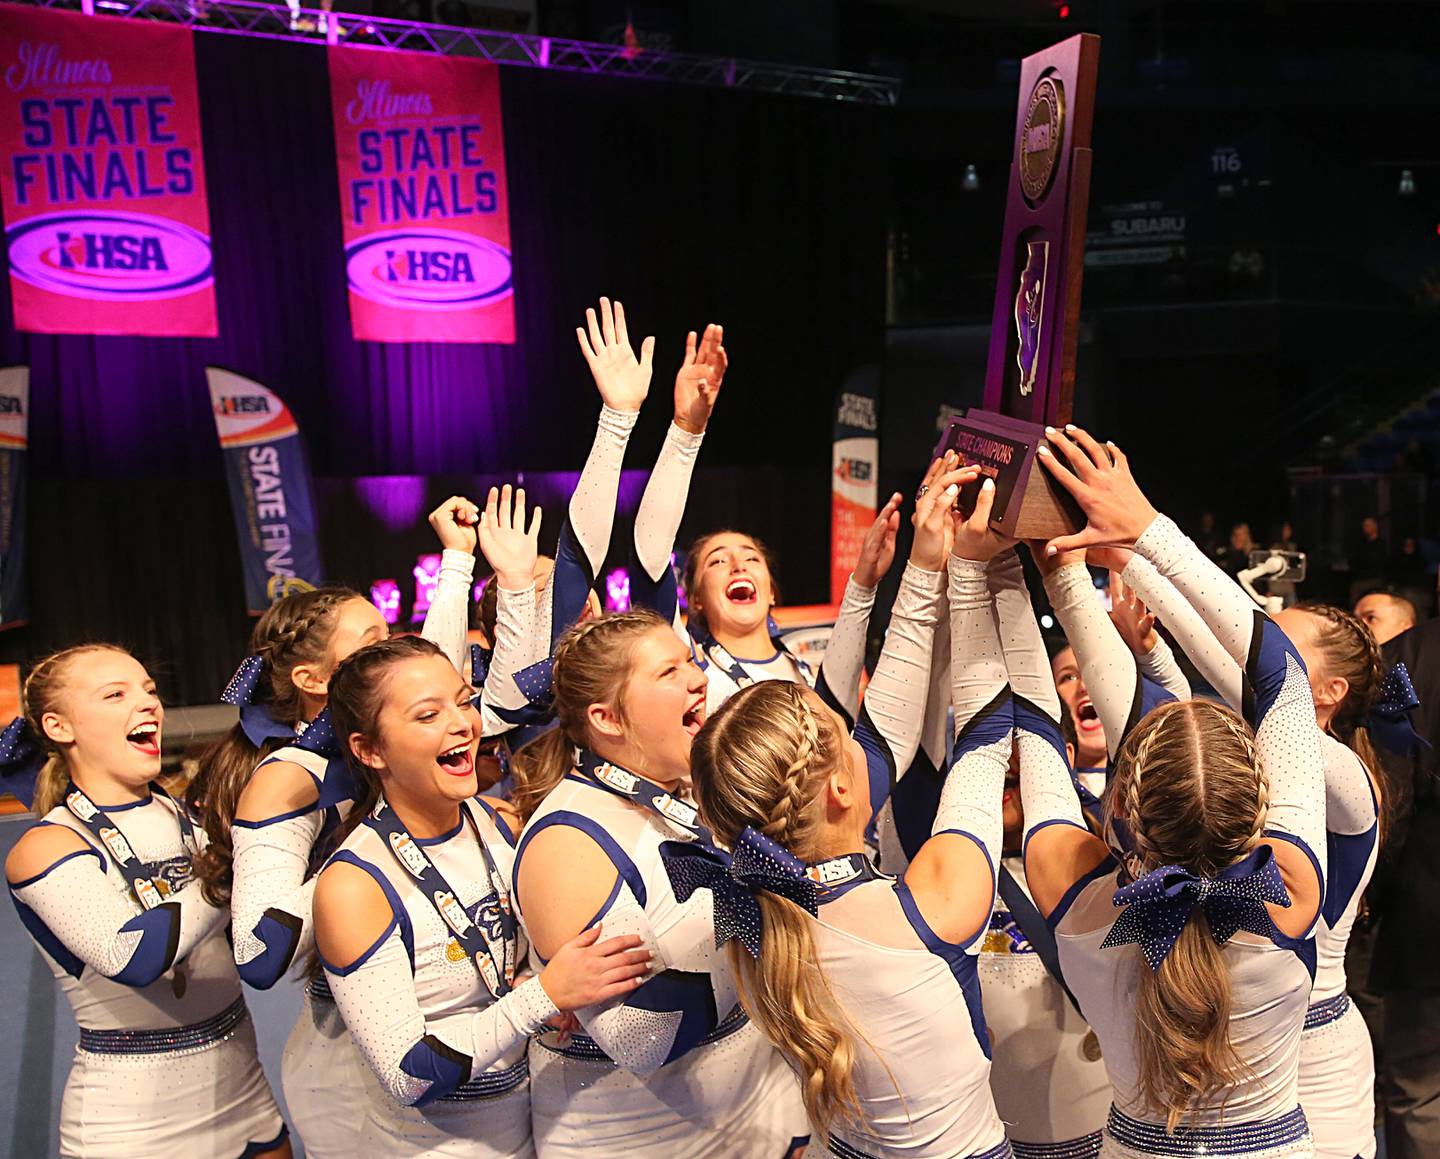 Members of the Johnsburg cheer team receive the first place trophy during the IHSA Cheer State Finals in Grossinger Motors Arena on Saturday, Feb. 4, 2023 in Bloomington.